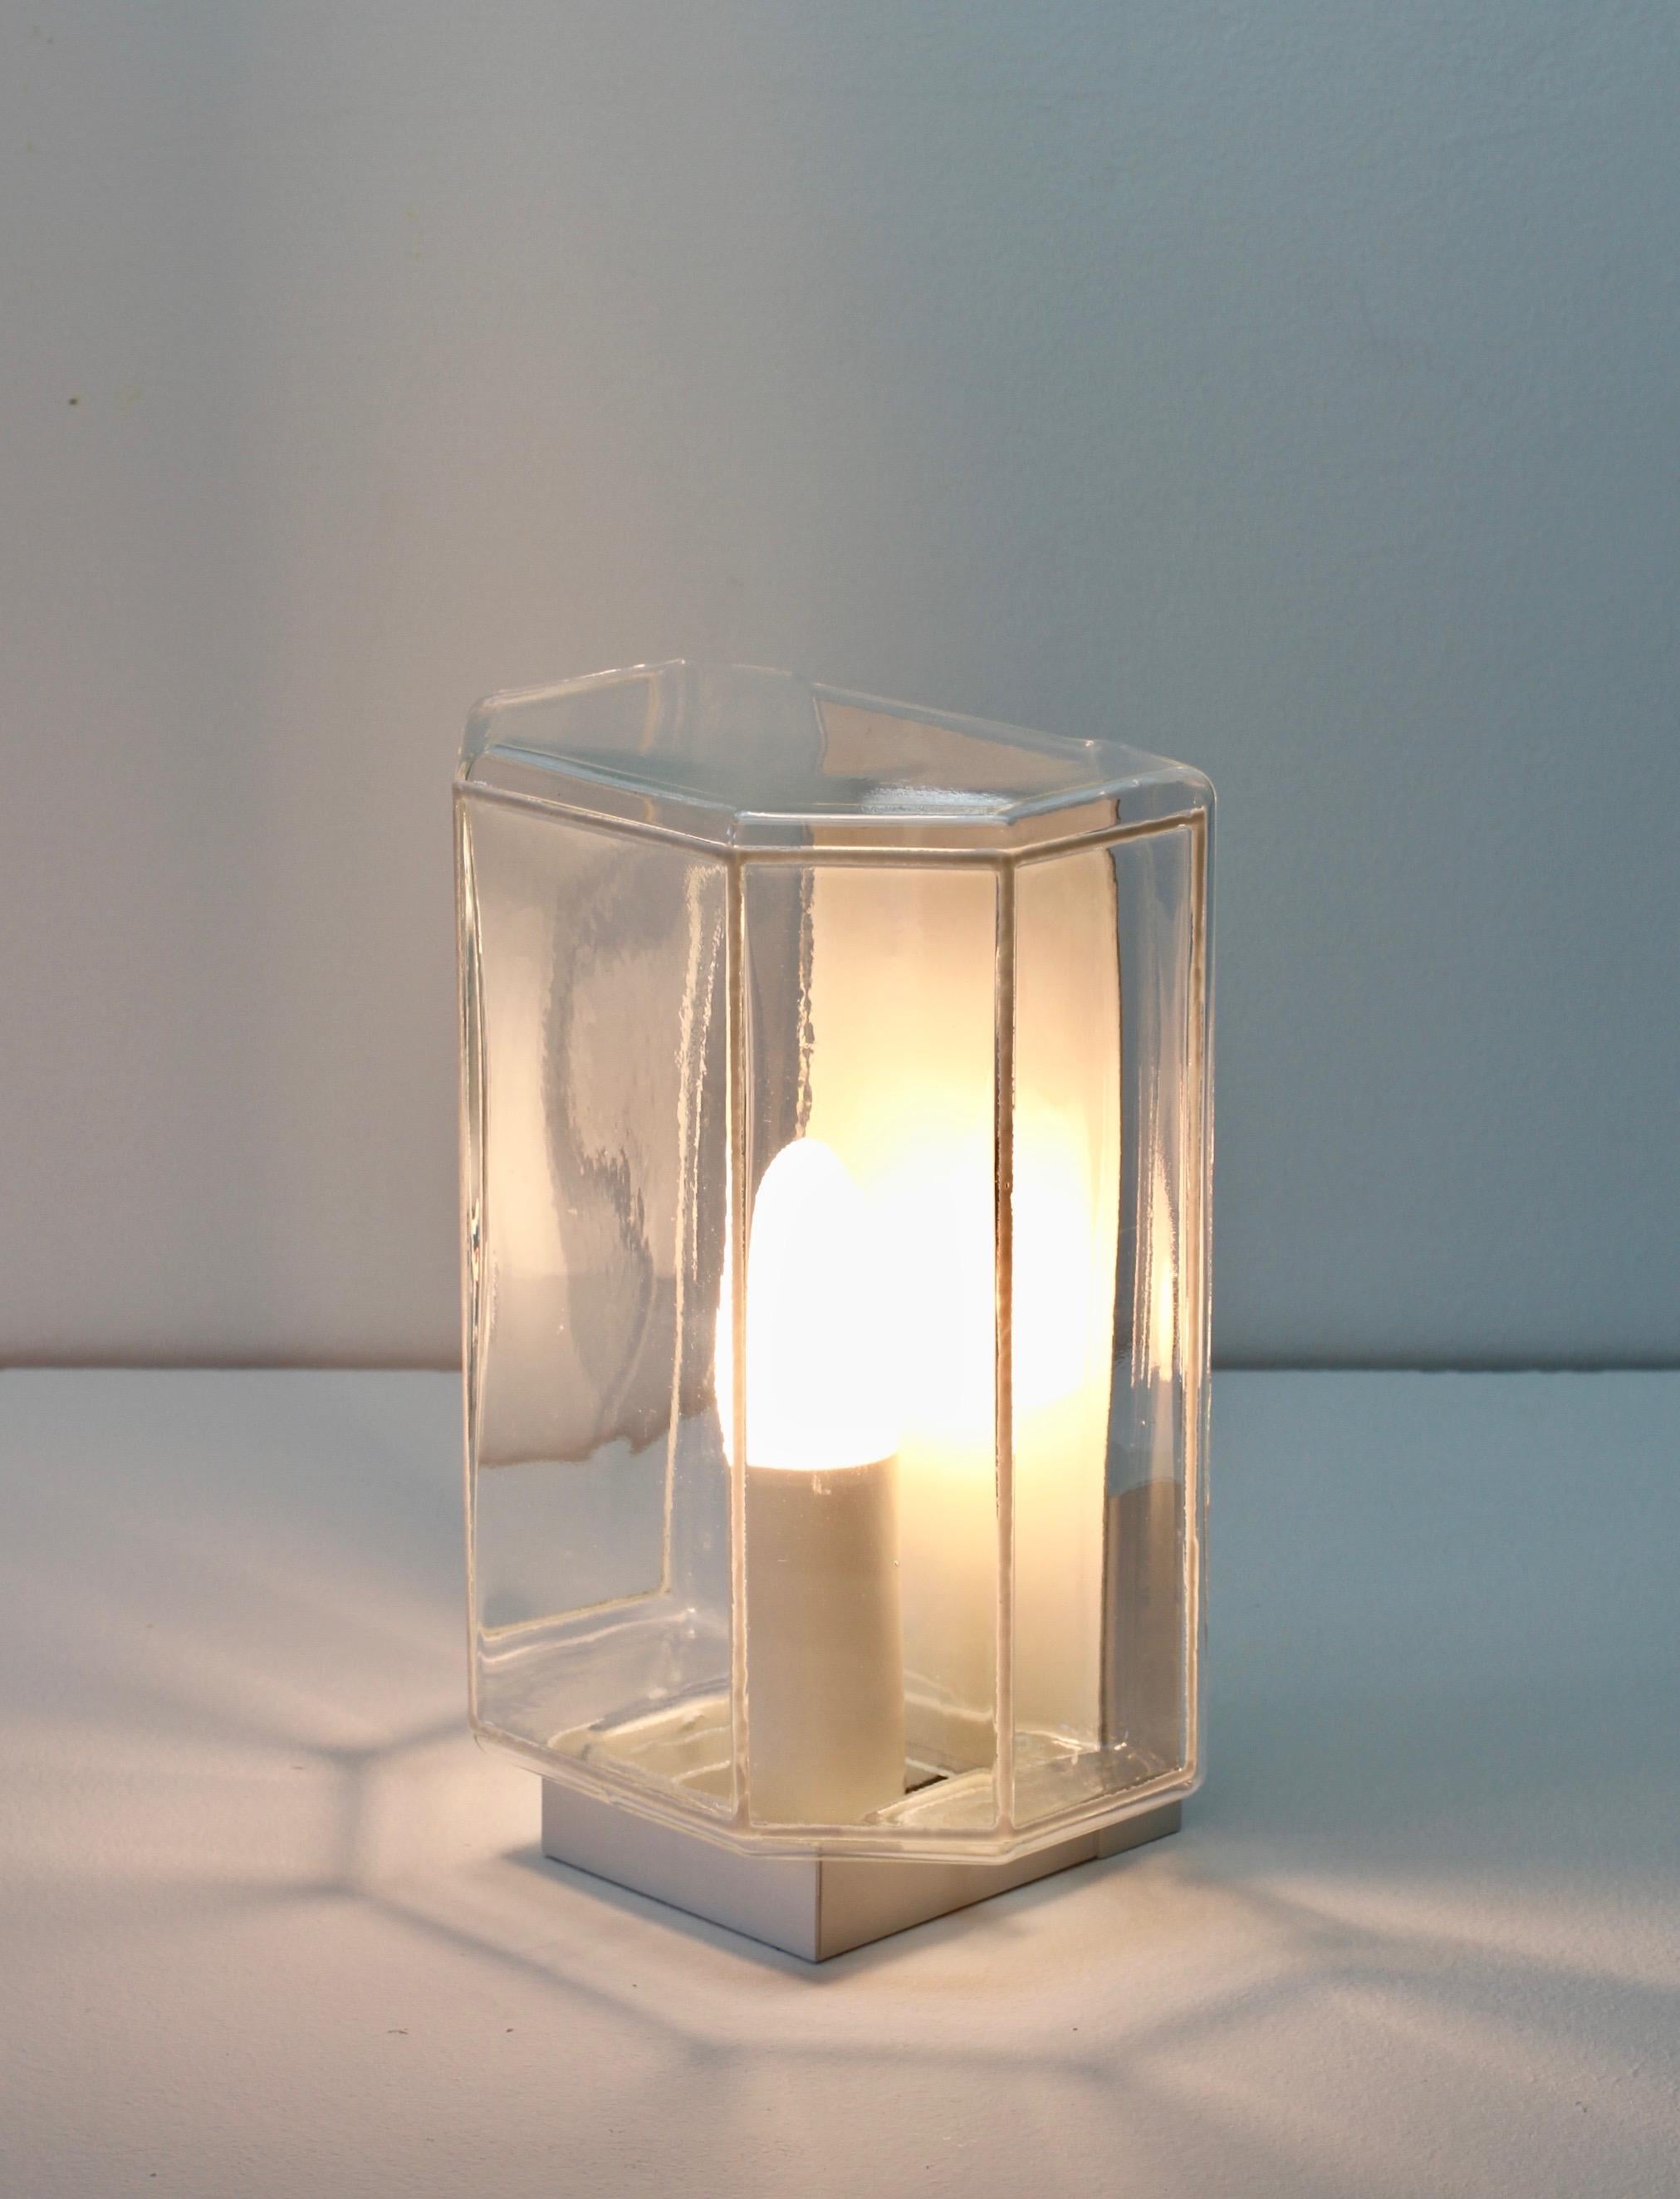 1 of 3 1970s Minimalist White and Clear Glass Wall Lights by Glashütte Limburg  3